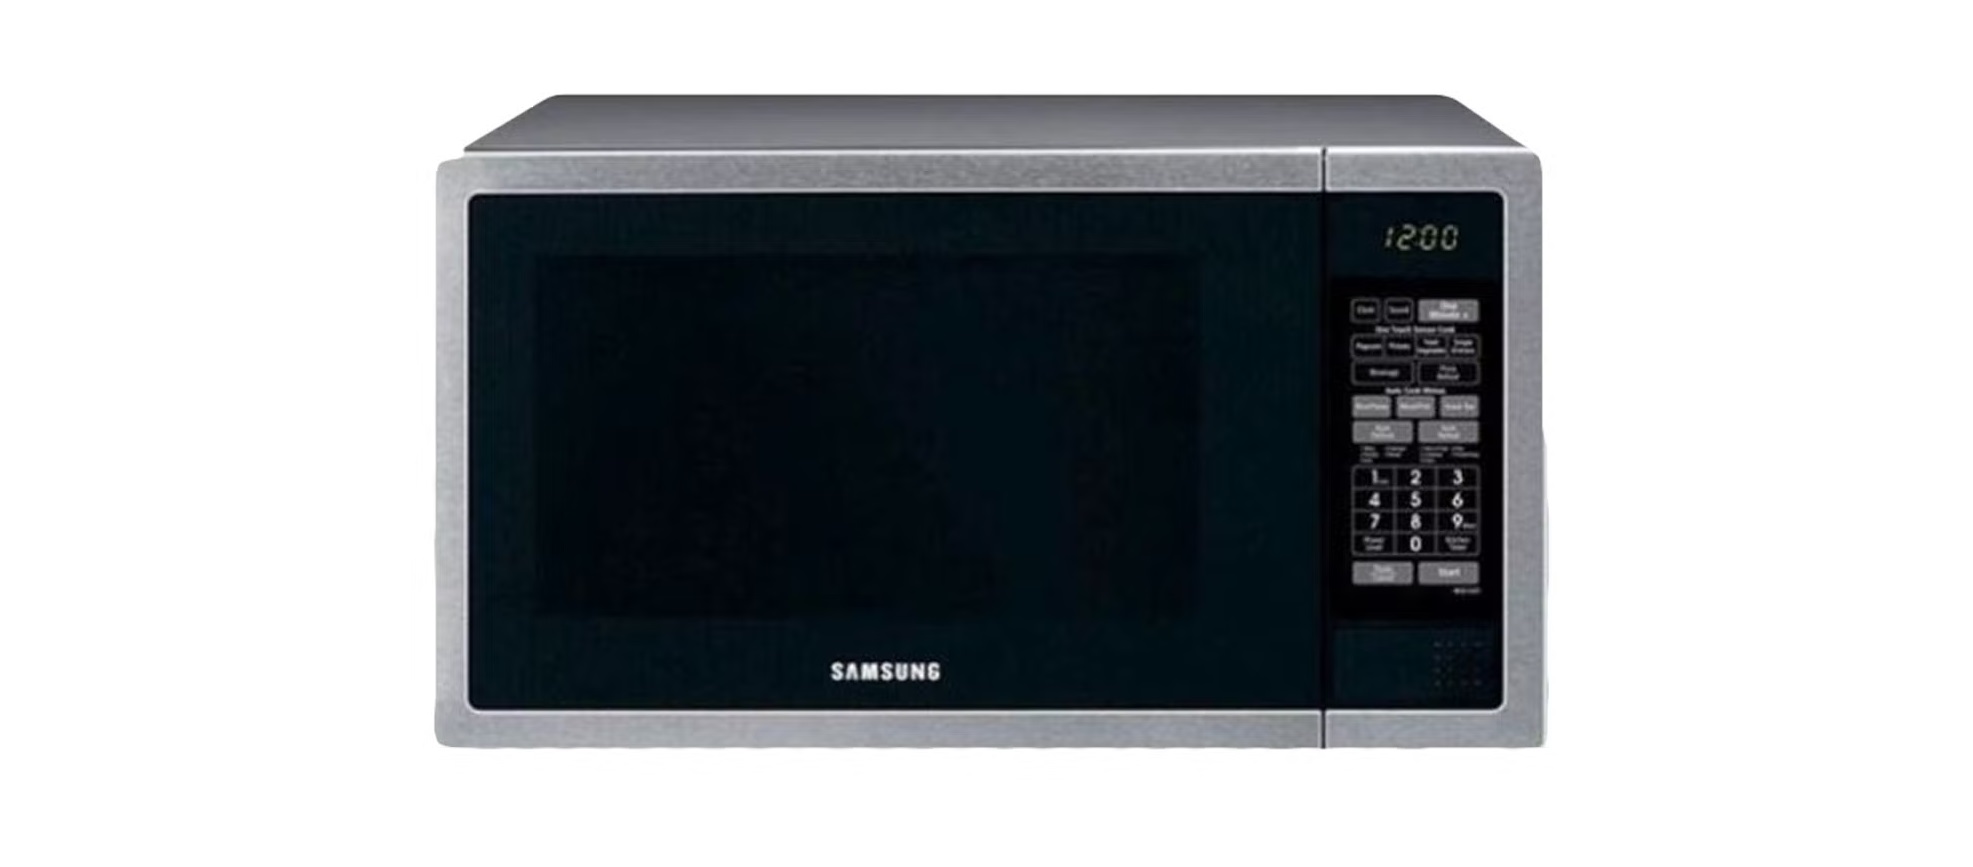 Samsung Microwave And Oven Control, Silver/Black - ME6194ST